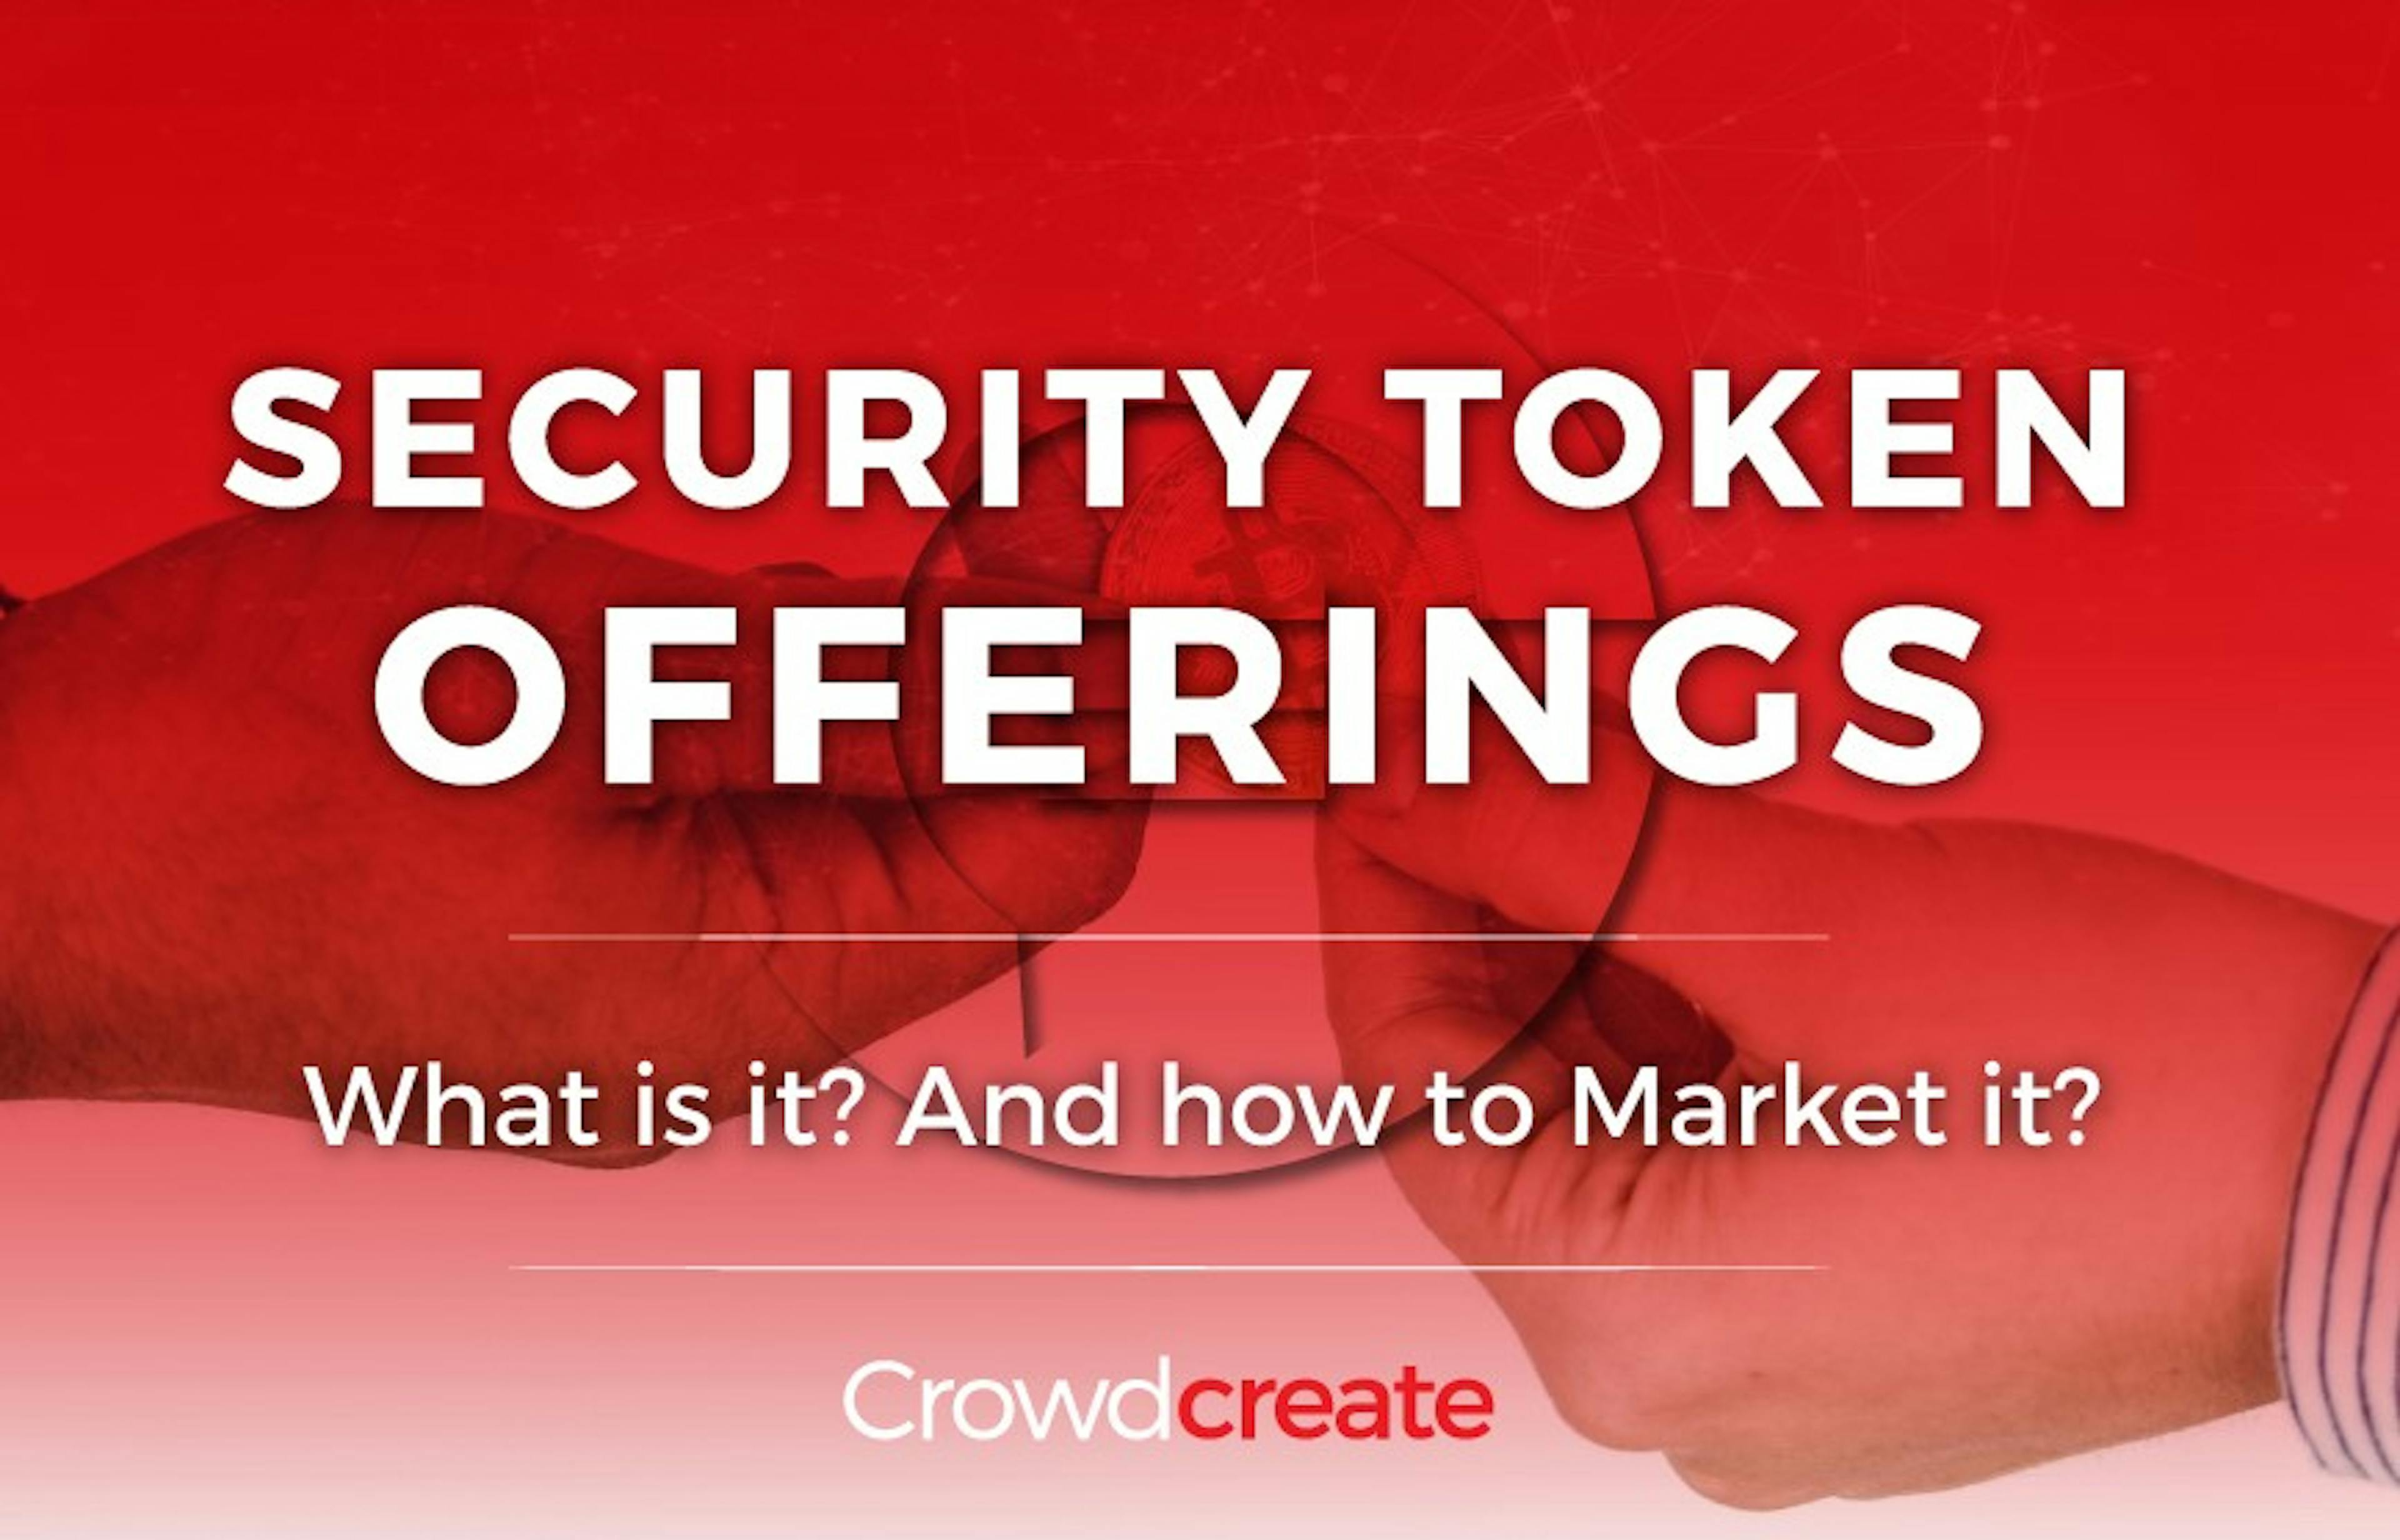 /security-token-offerings-what-is-it-and-how-to-market-it-a067f46a6f2f feature image